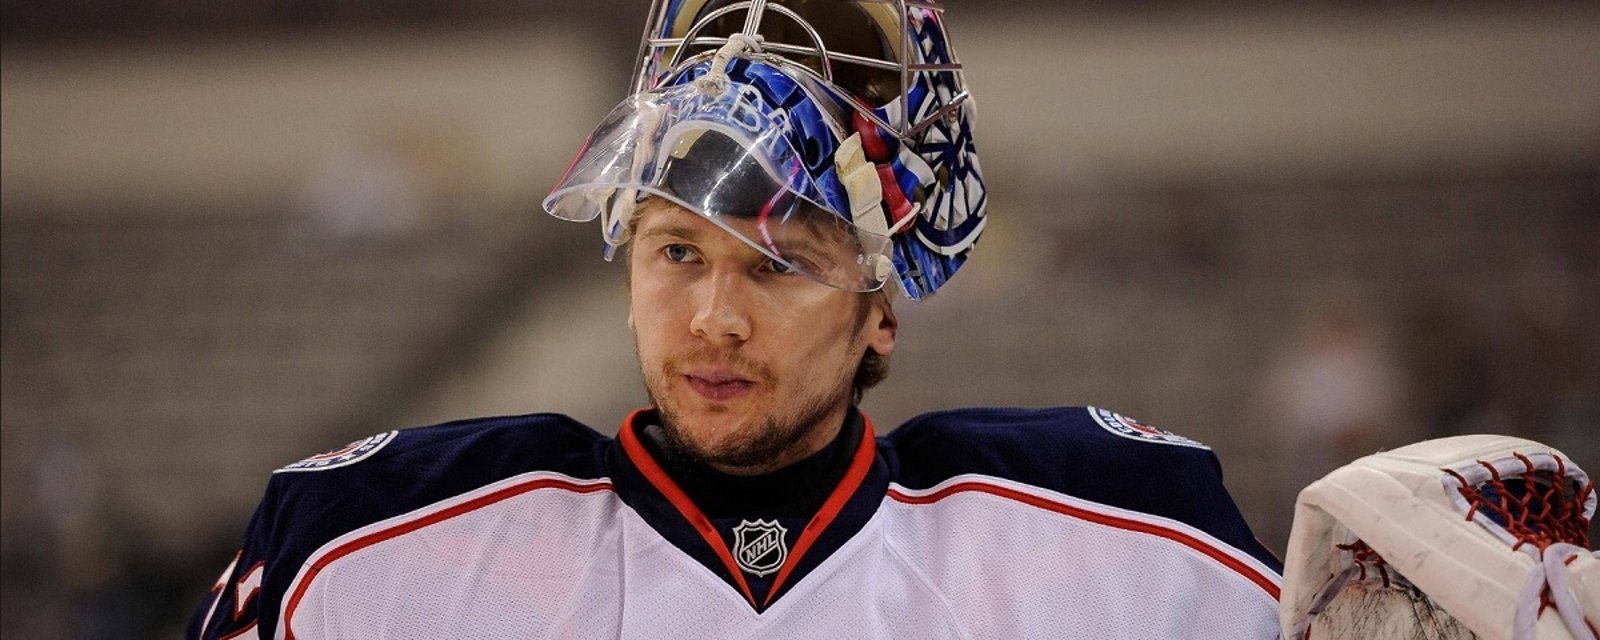 Sergei Bobrovsky drops his stick to make one of the most incredible saves of the year.